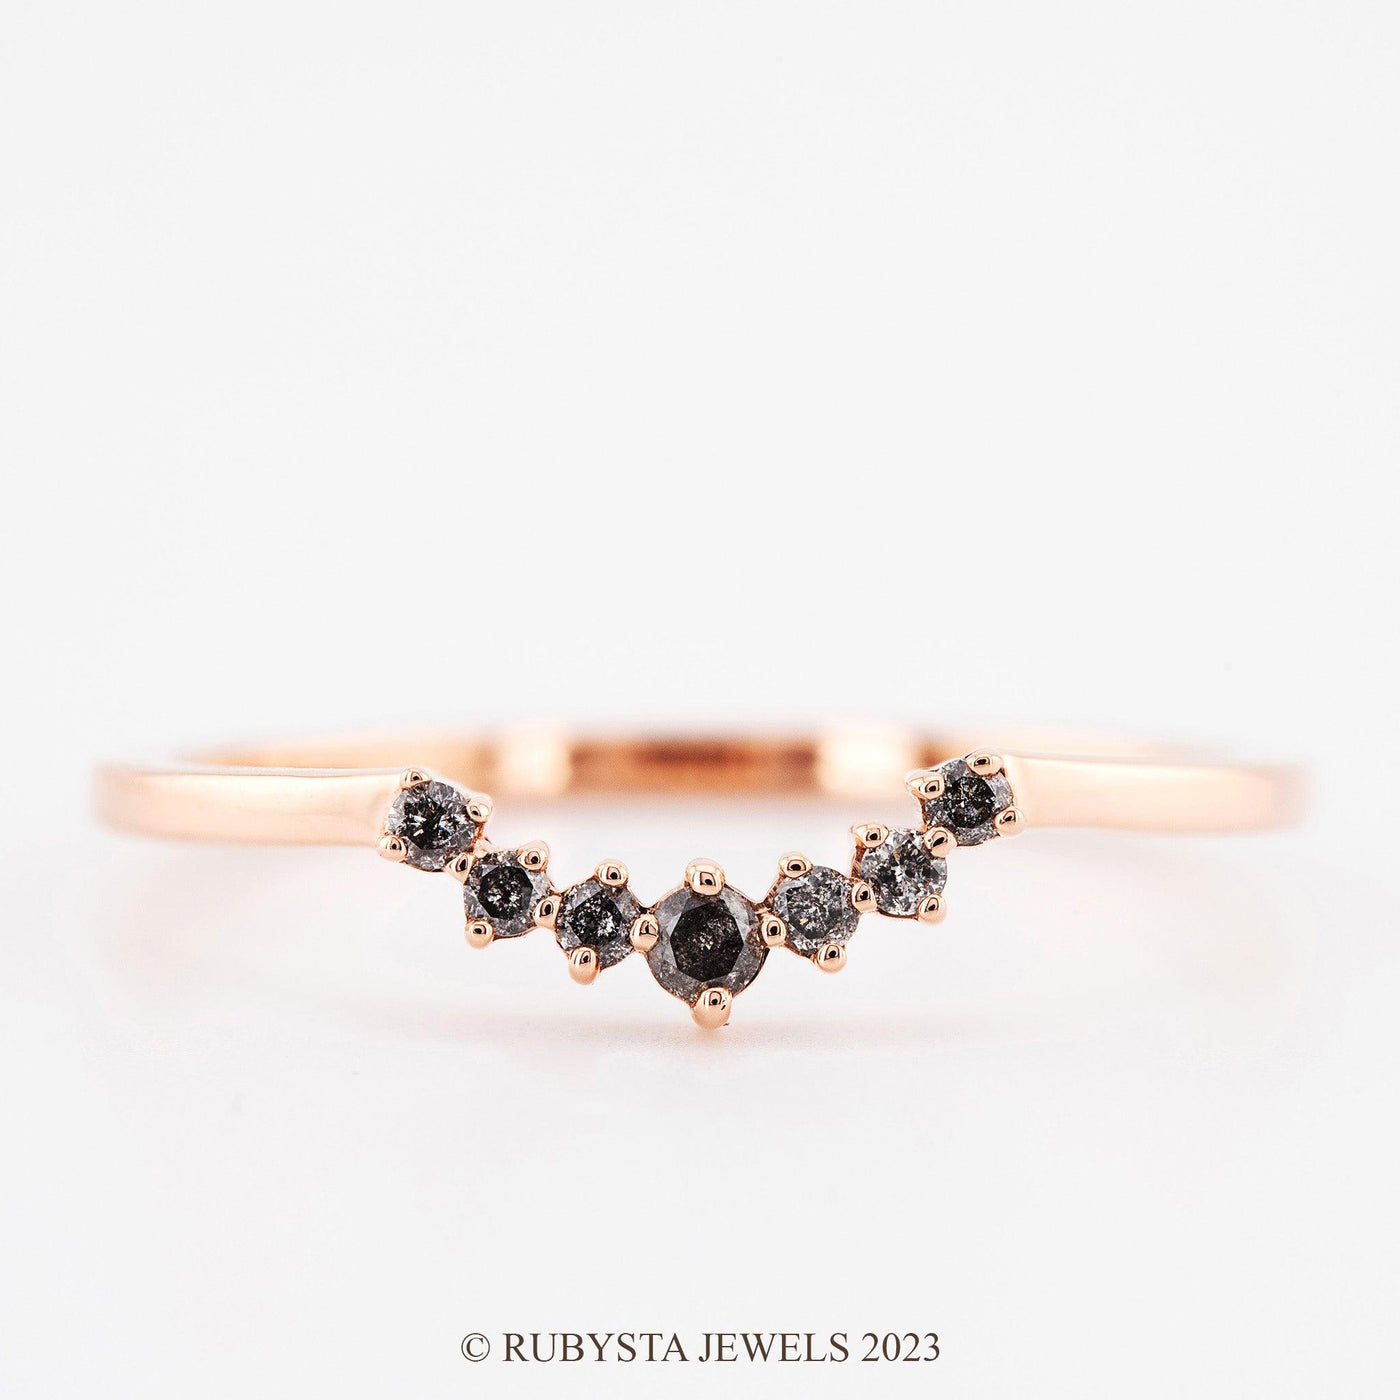 Stacking band, Wedding band, Engagement ring, Salt and pepper diamond ring - Rubysta